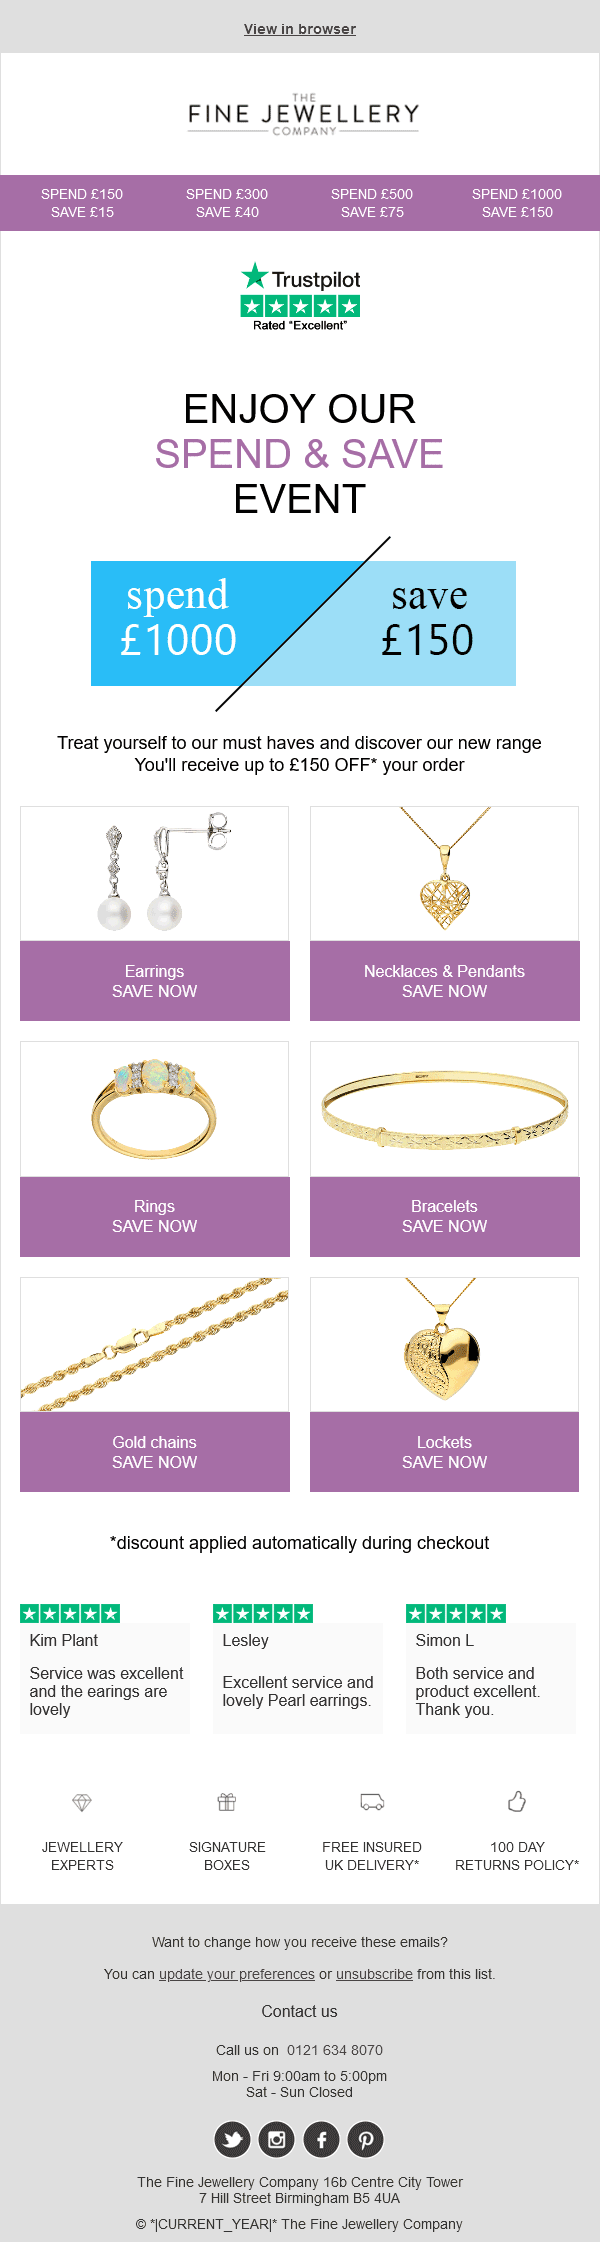 Email Templates Created For The Fine Jewellery Company Marketing Jewellery desktop design